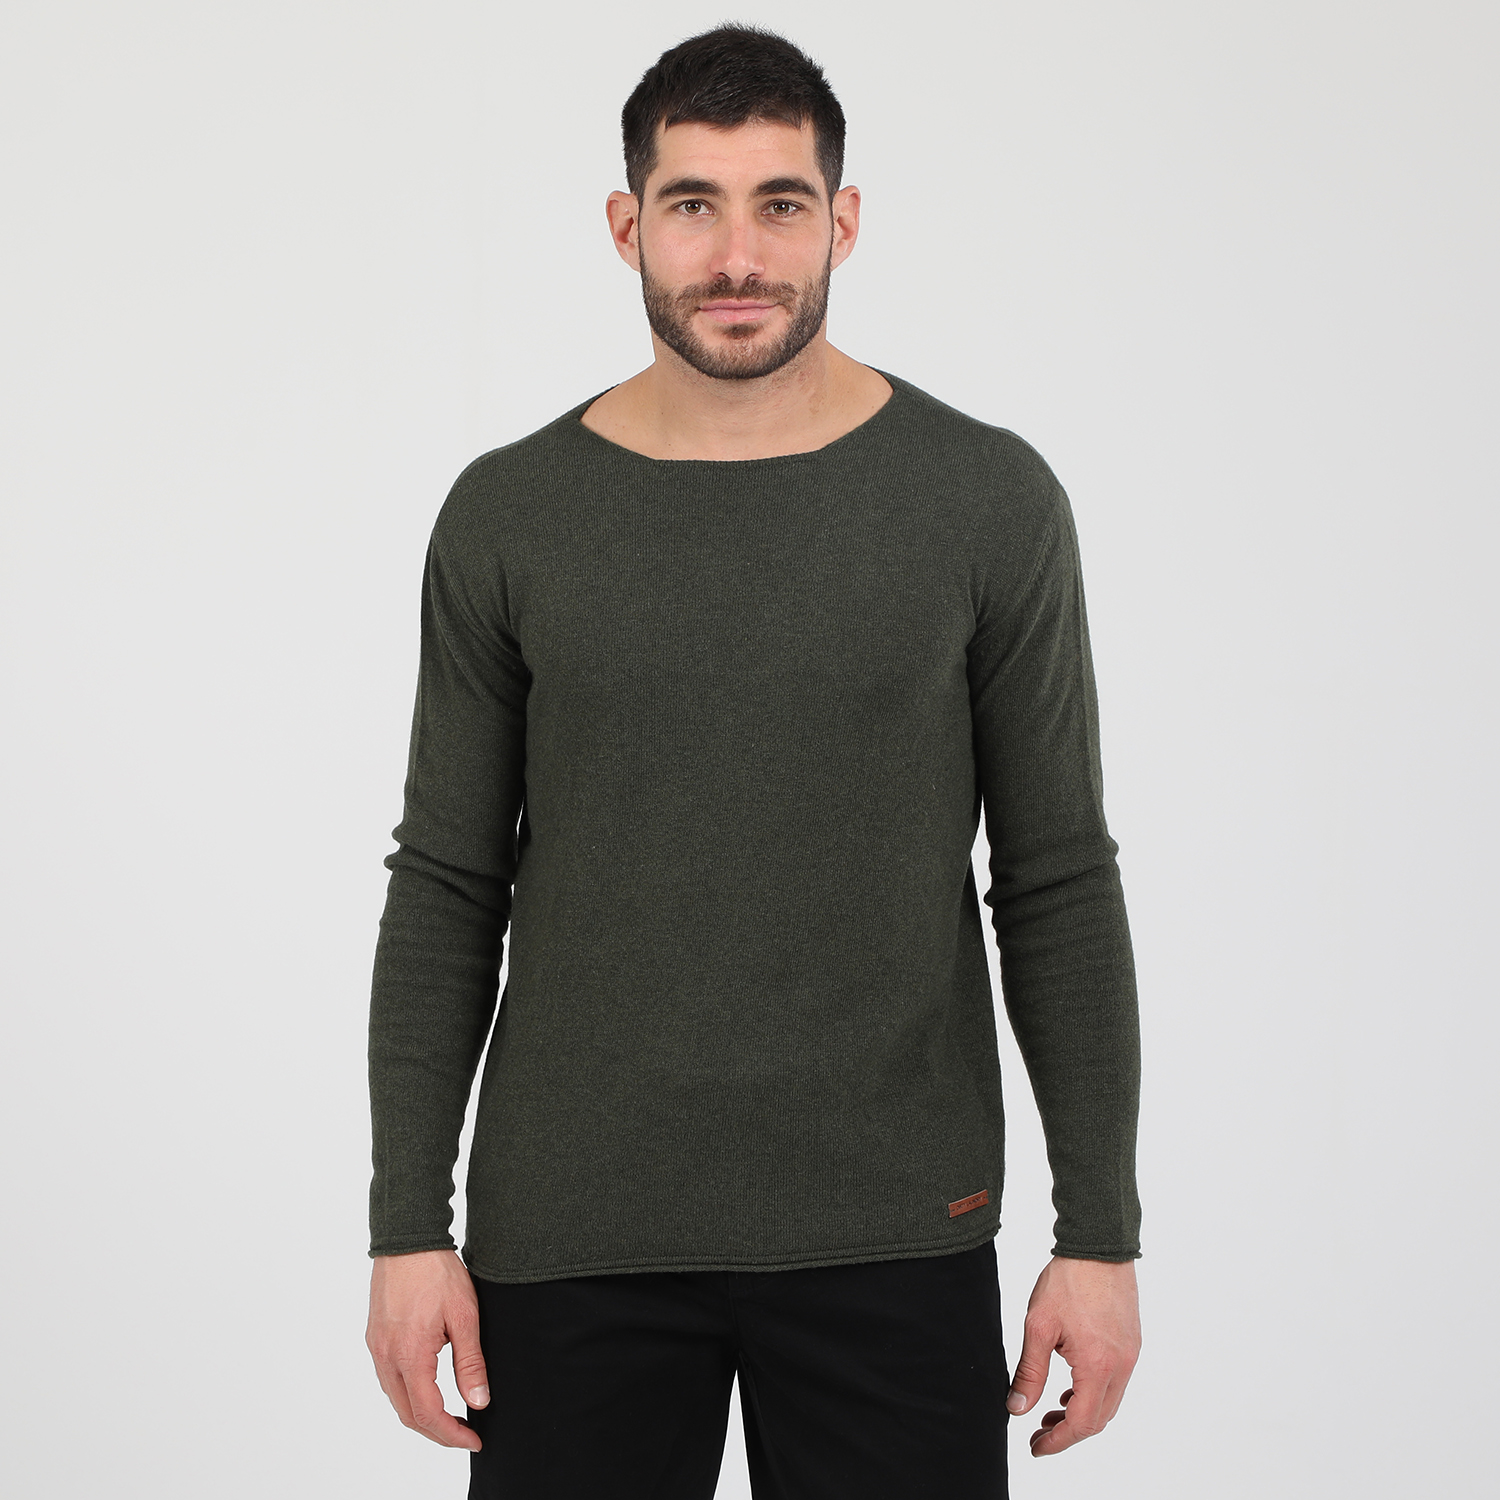 DIRTY LAUNDRY Ανδρική πλεκτή μπλούζα DIRTY LAUNDRY CASHMERE KNIT RAW-EDGED χακί